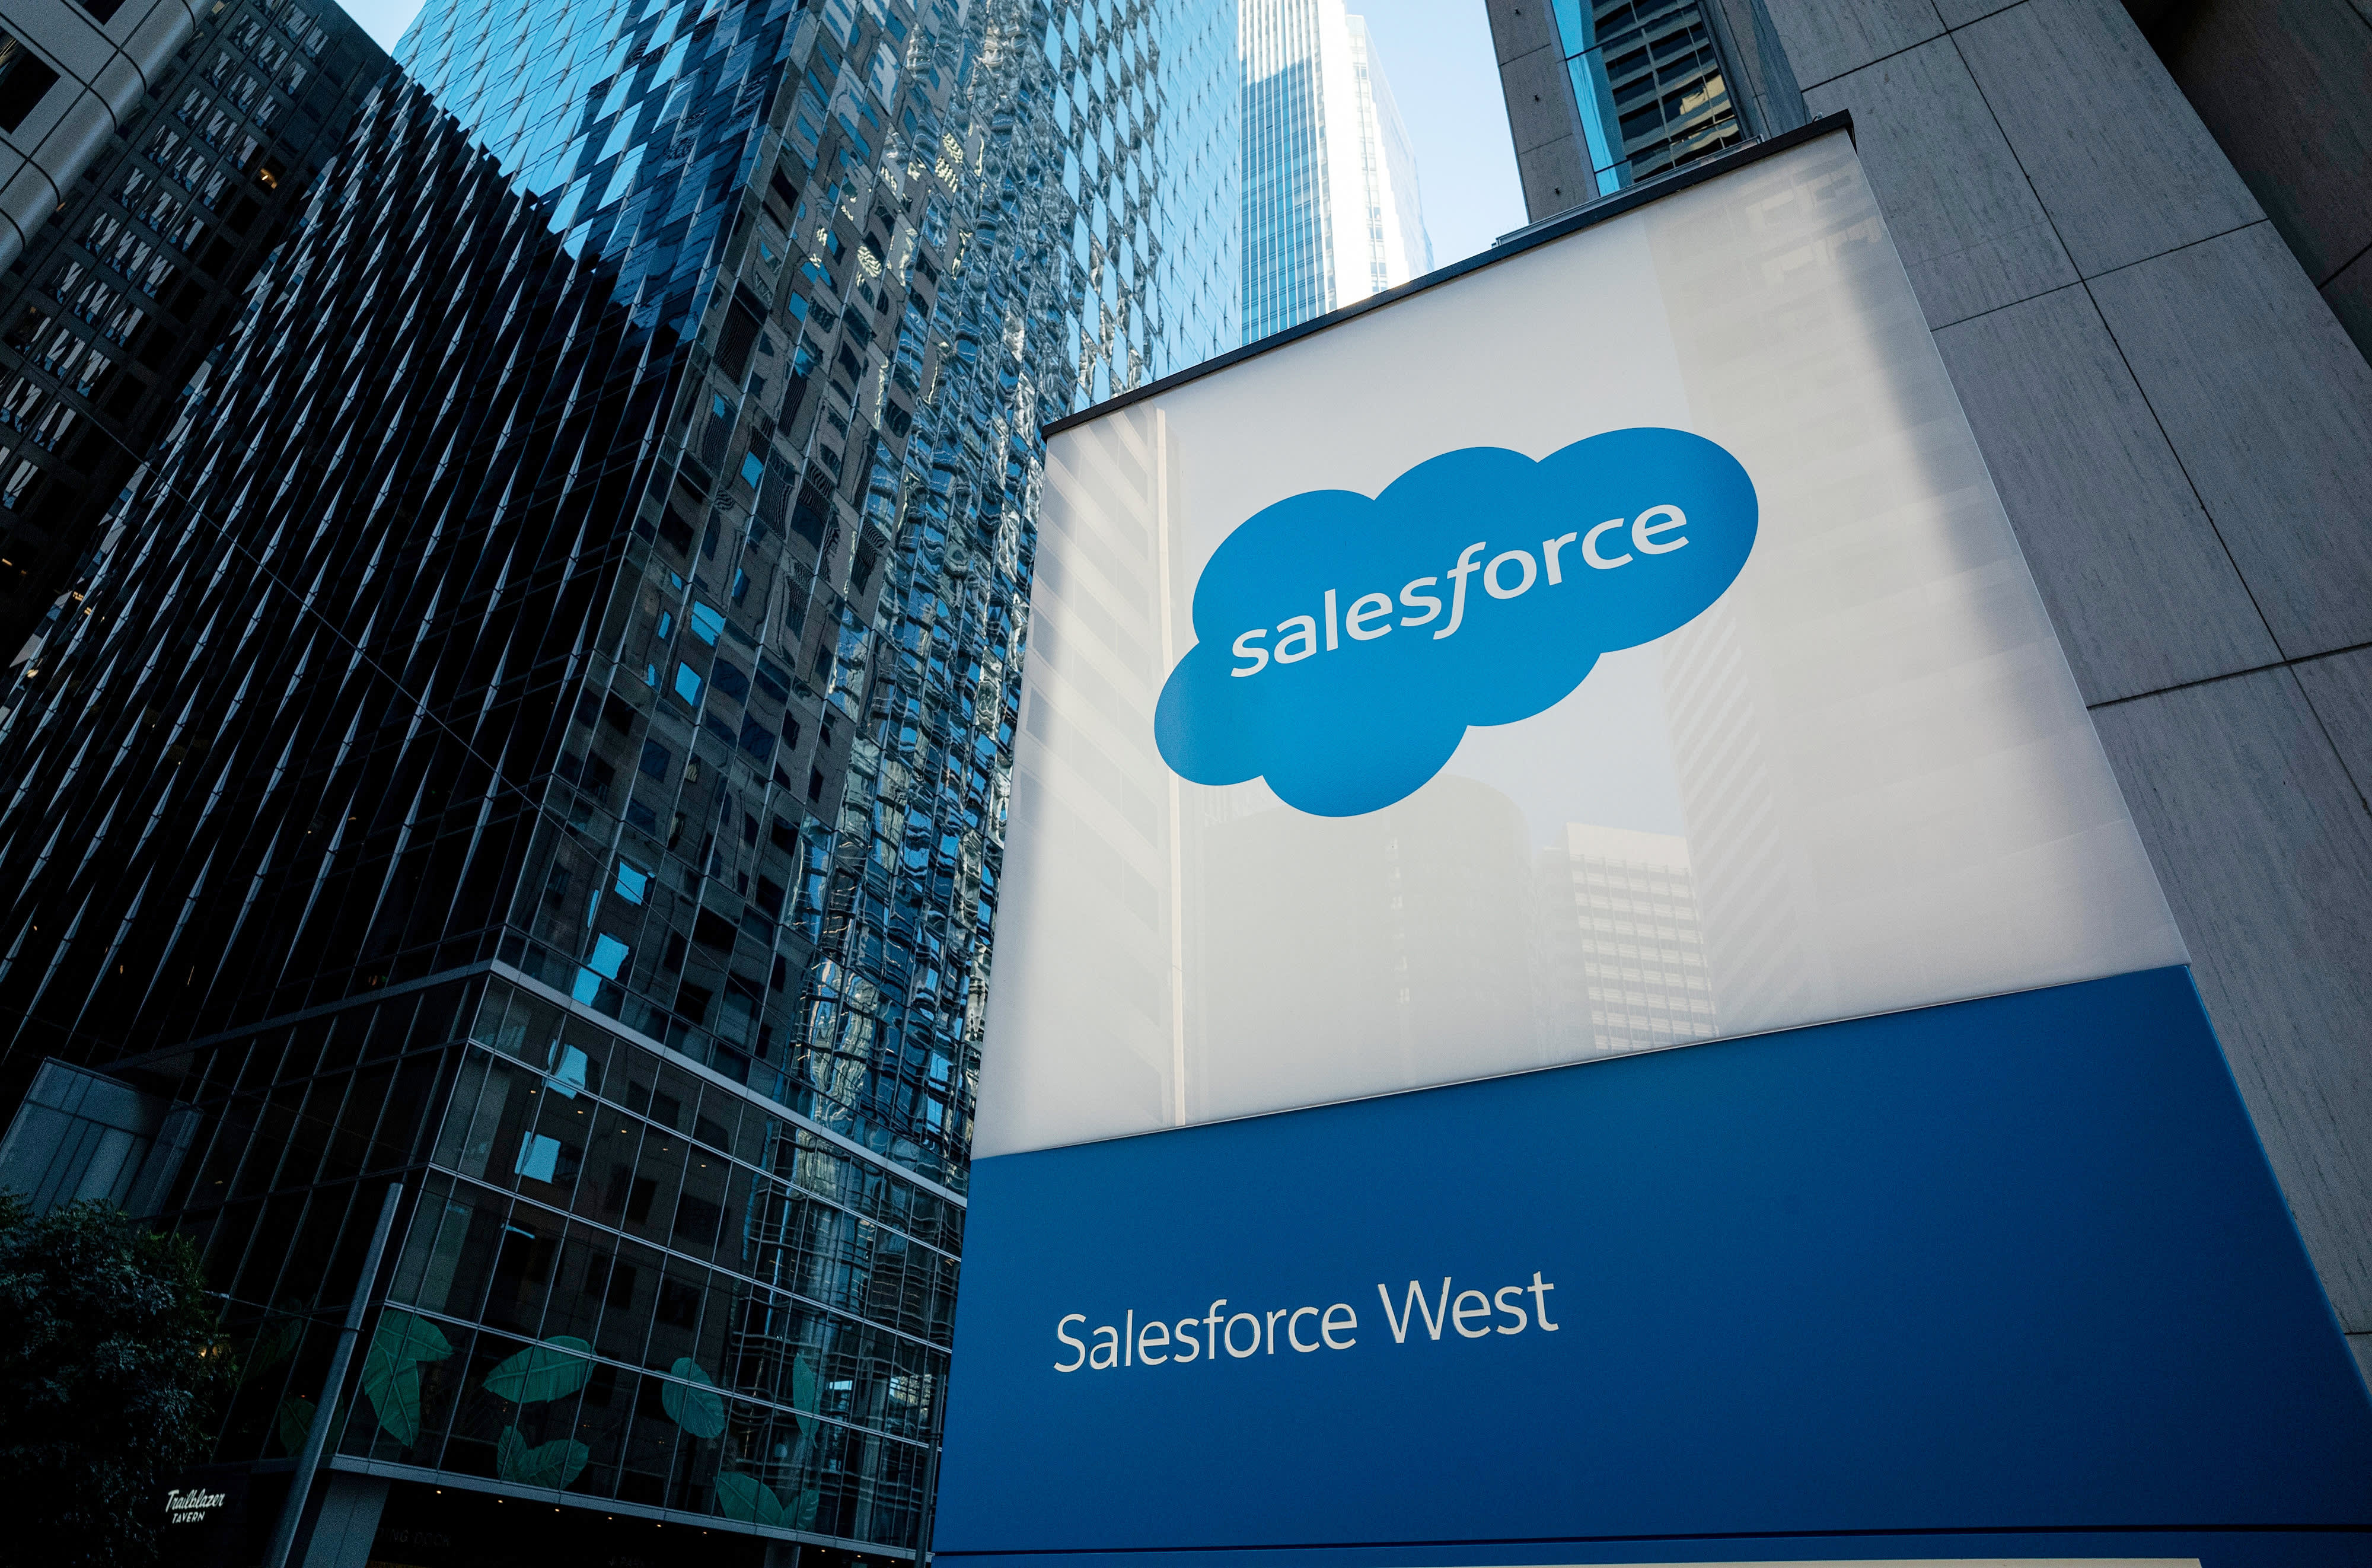 Cowen downgrades Salesforce as the company adjusts to an era of slower growth